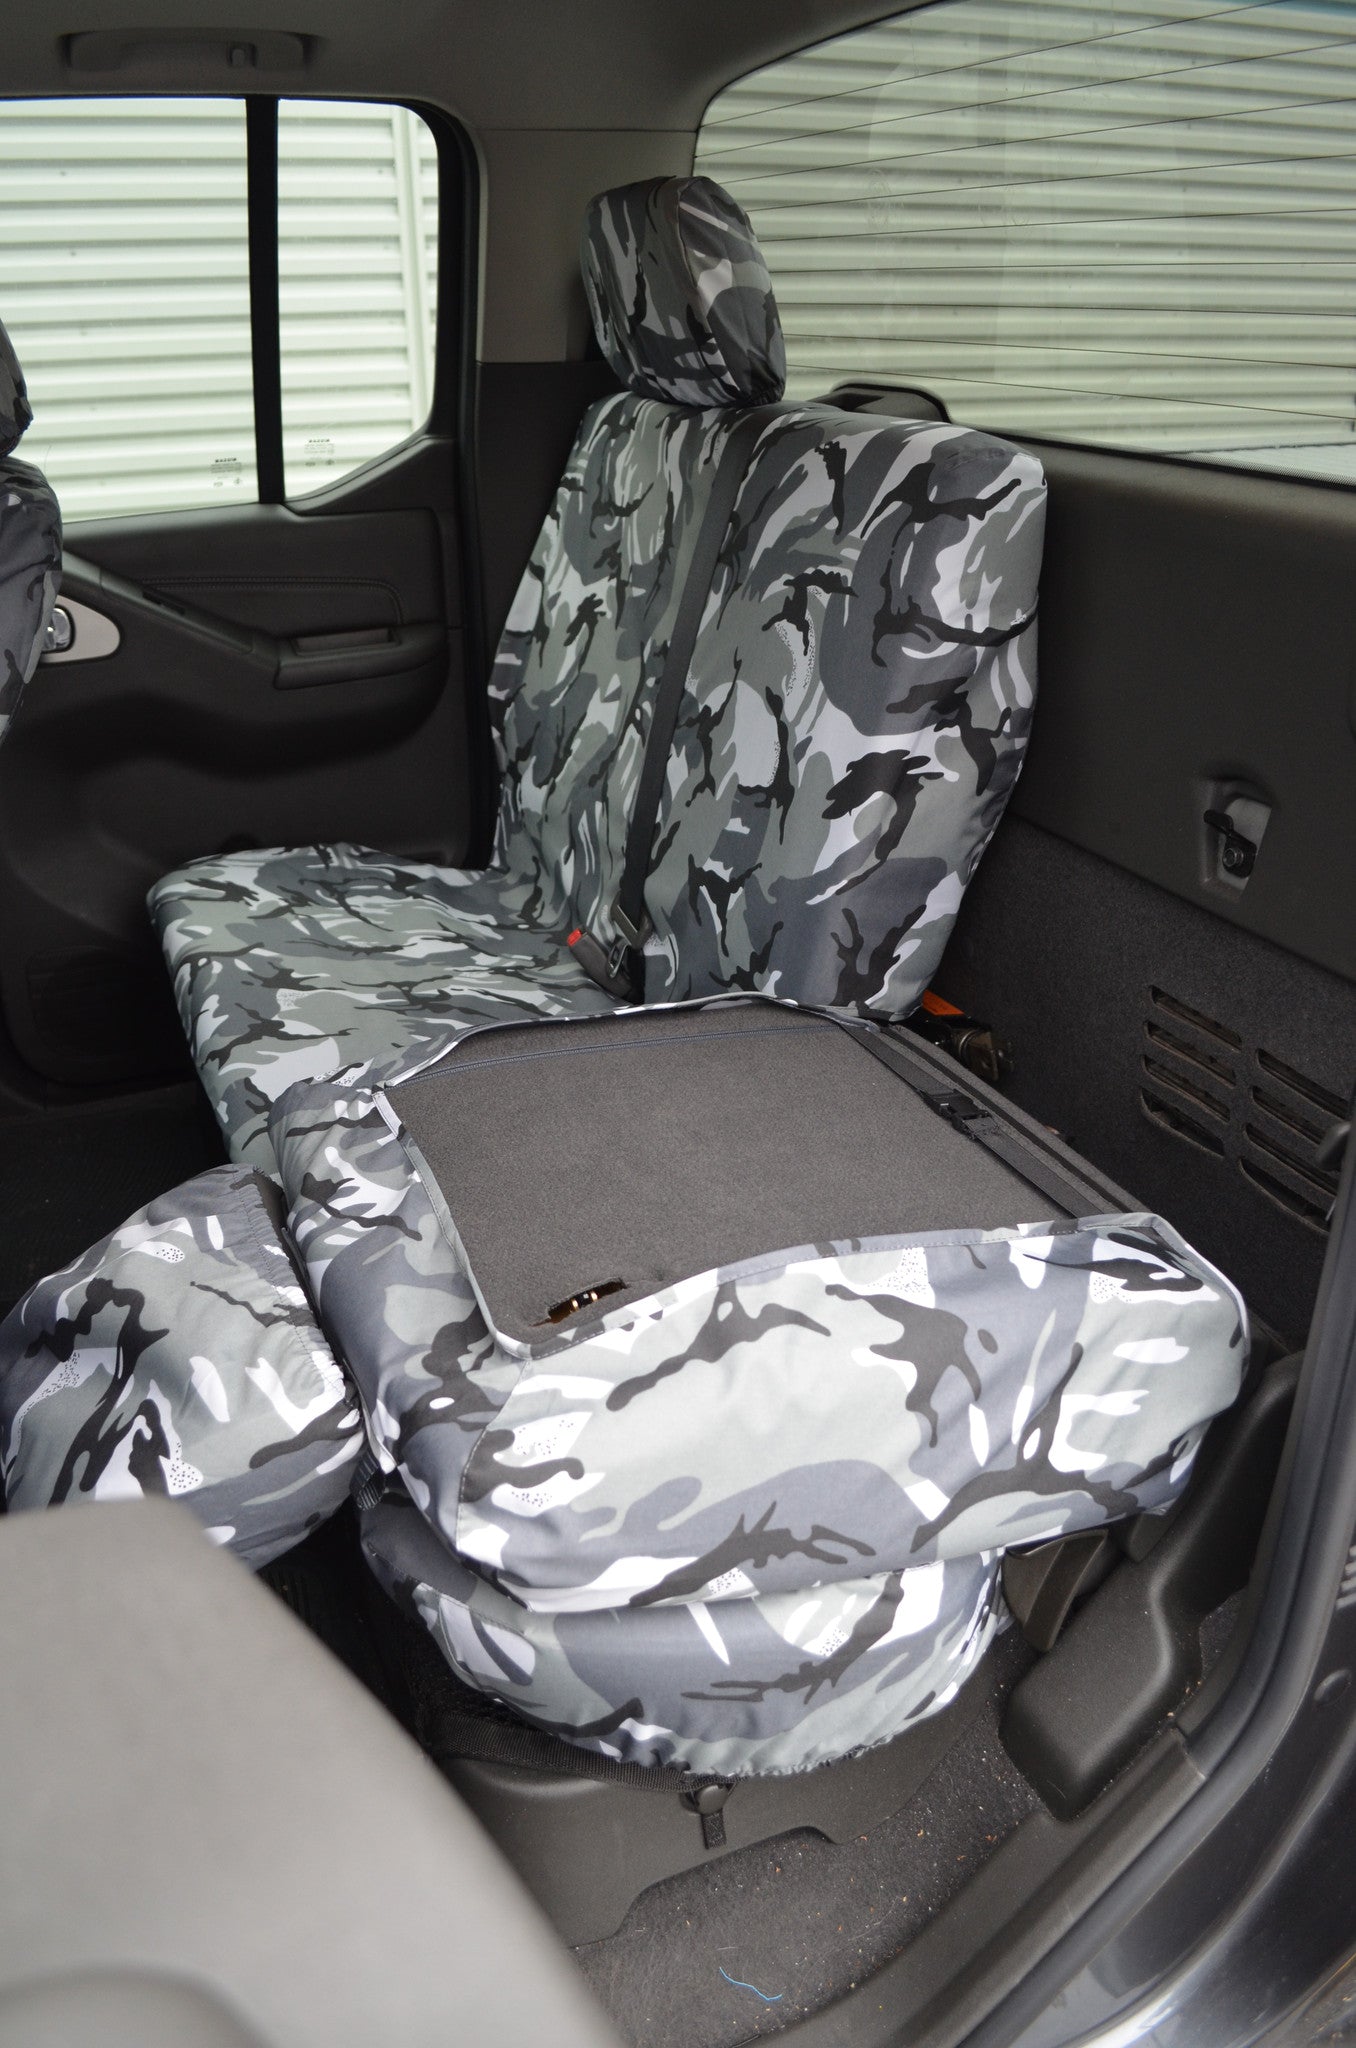 Nissan Navara Double Cab (2005 to 2016) Tailored Seat Covers  Scutes Ltd